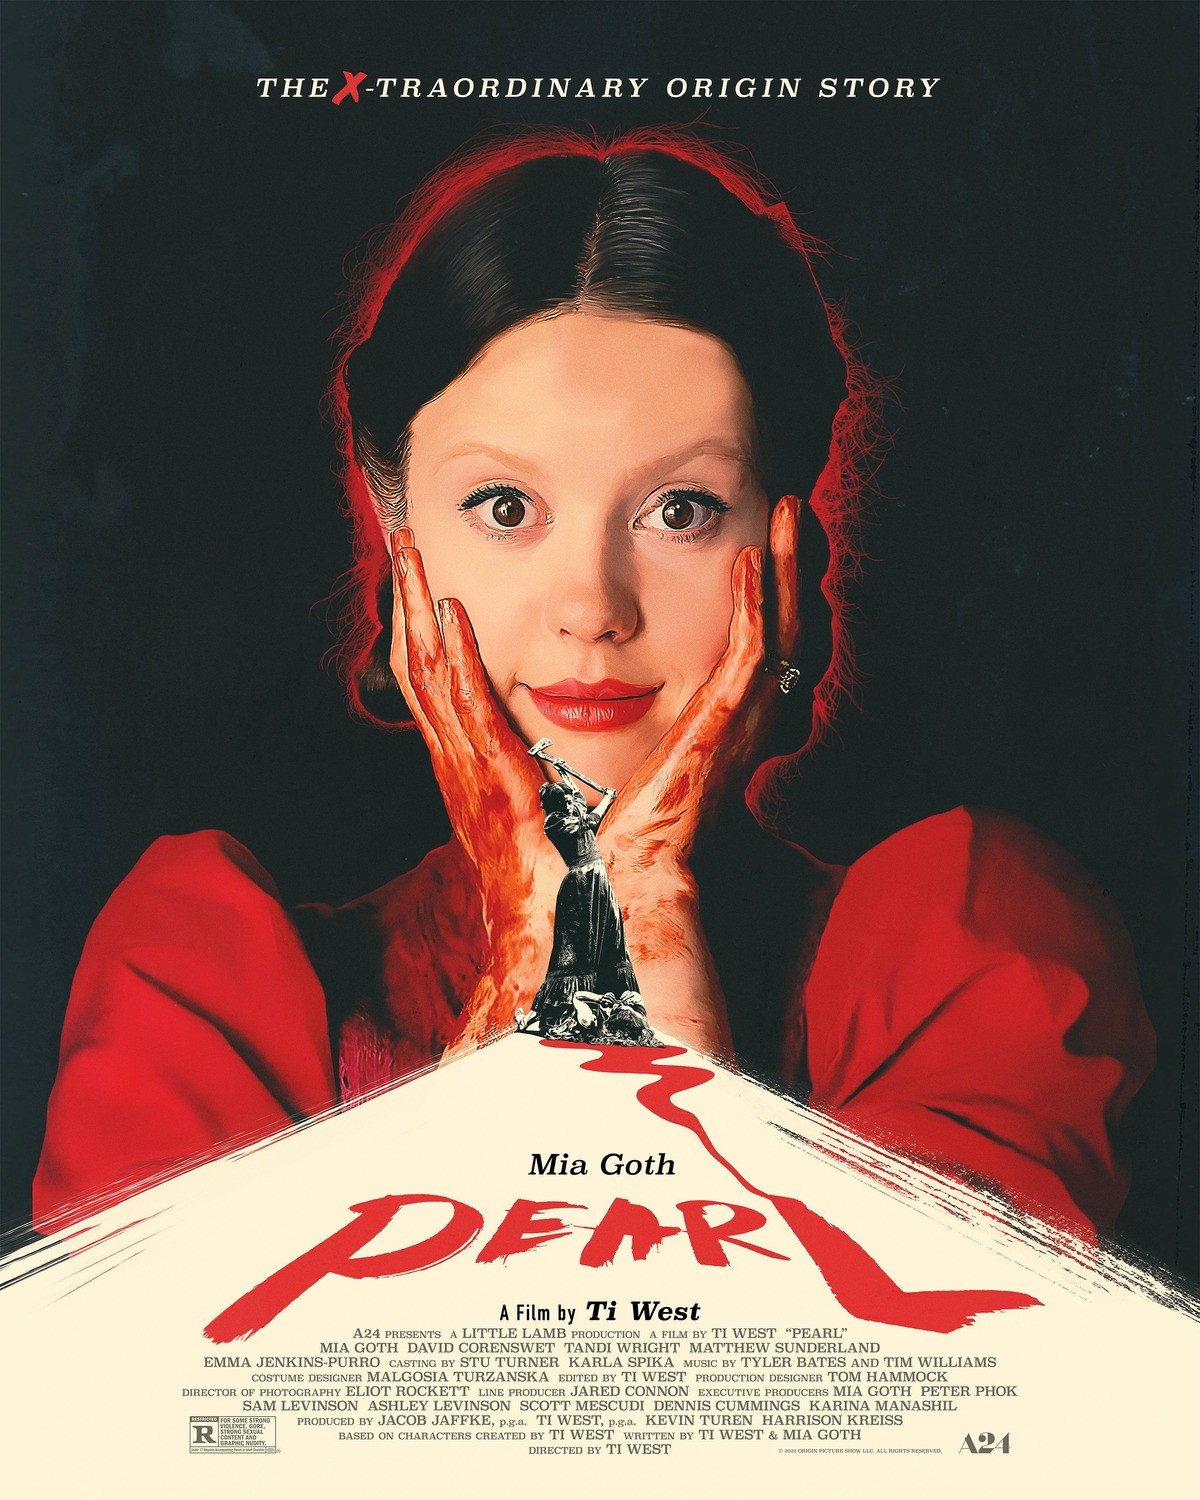 Ti West's 'PEARL' and 'X'